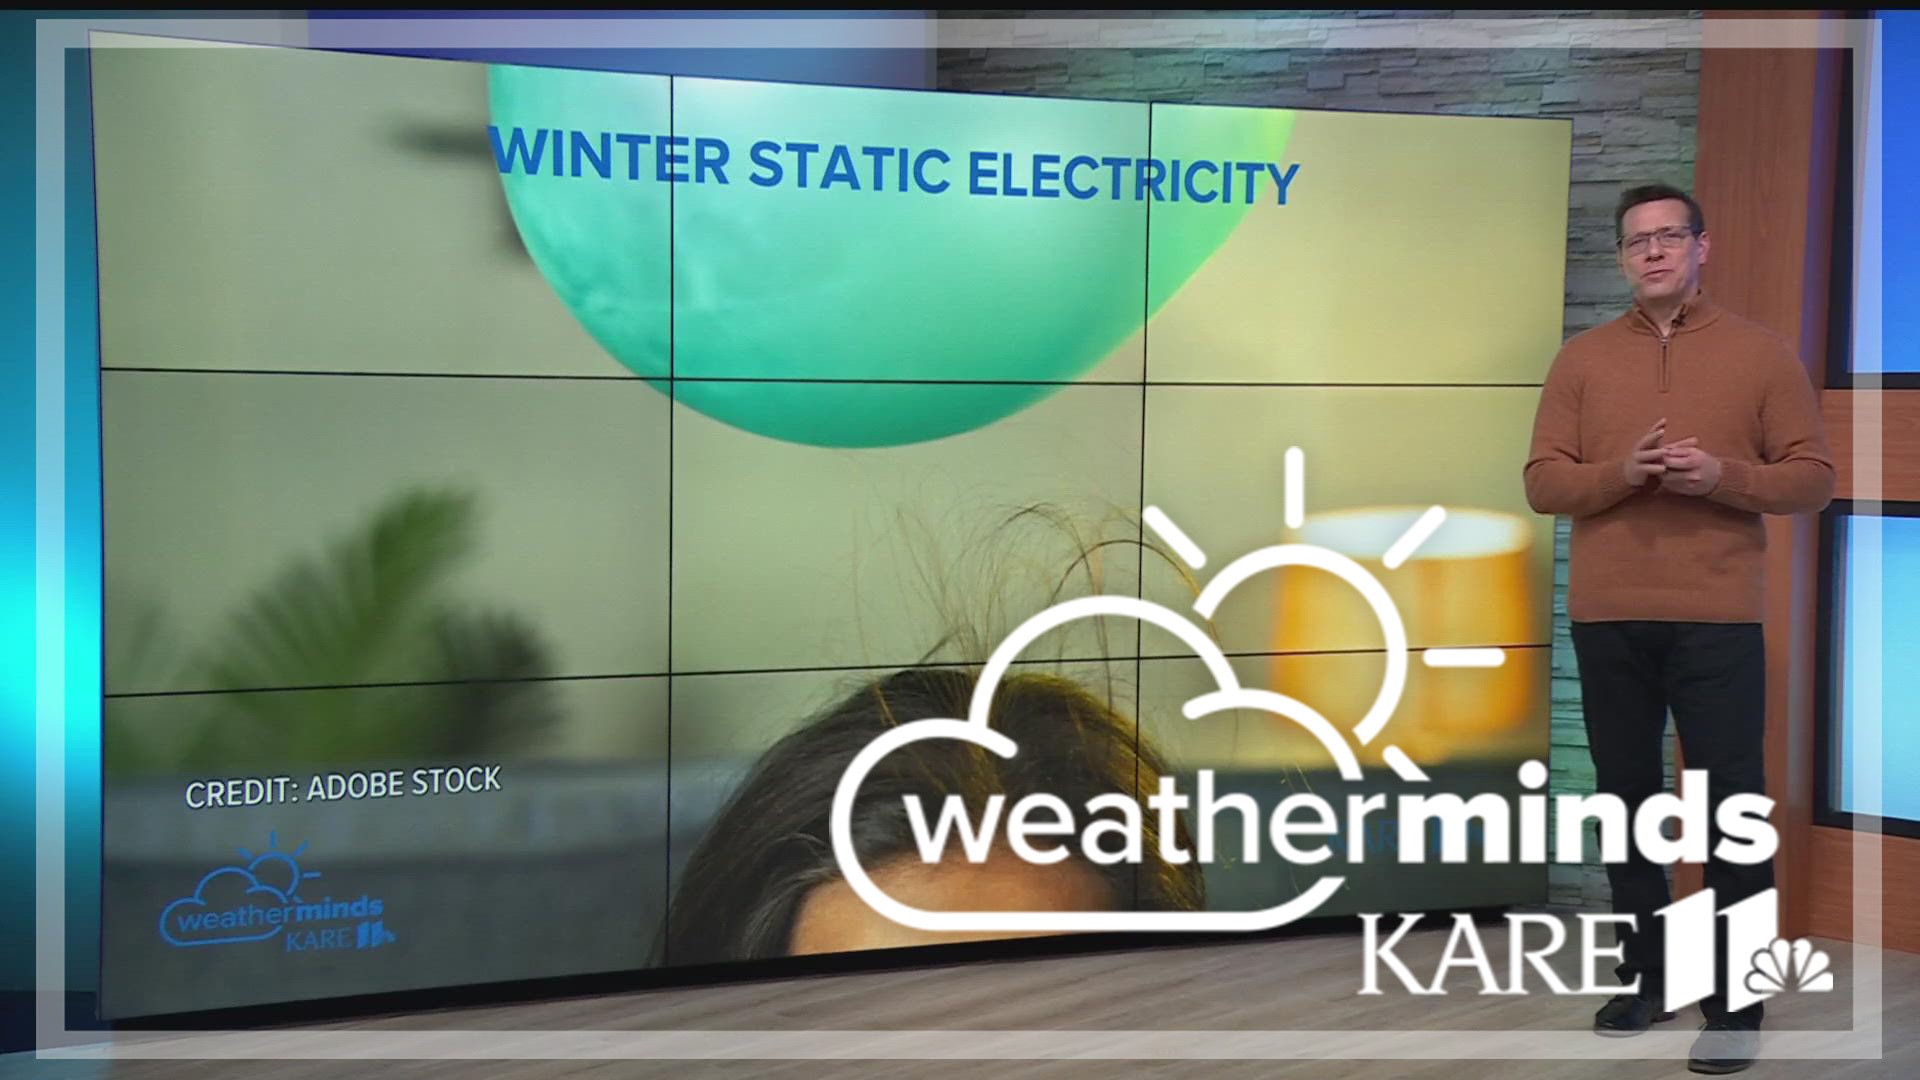 KARE 11 meteorologist Jamie Kagol explains why there is so much static electricity in the winter months.